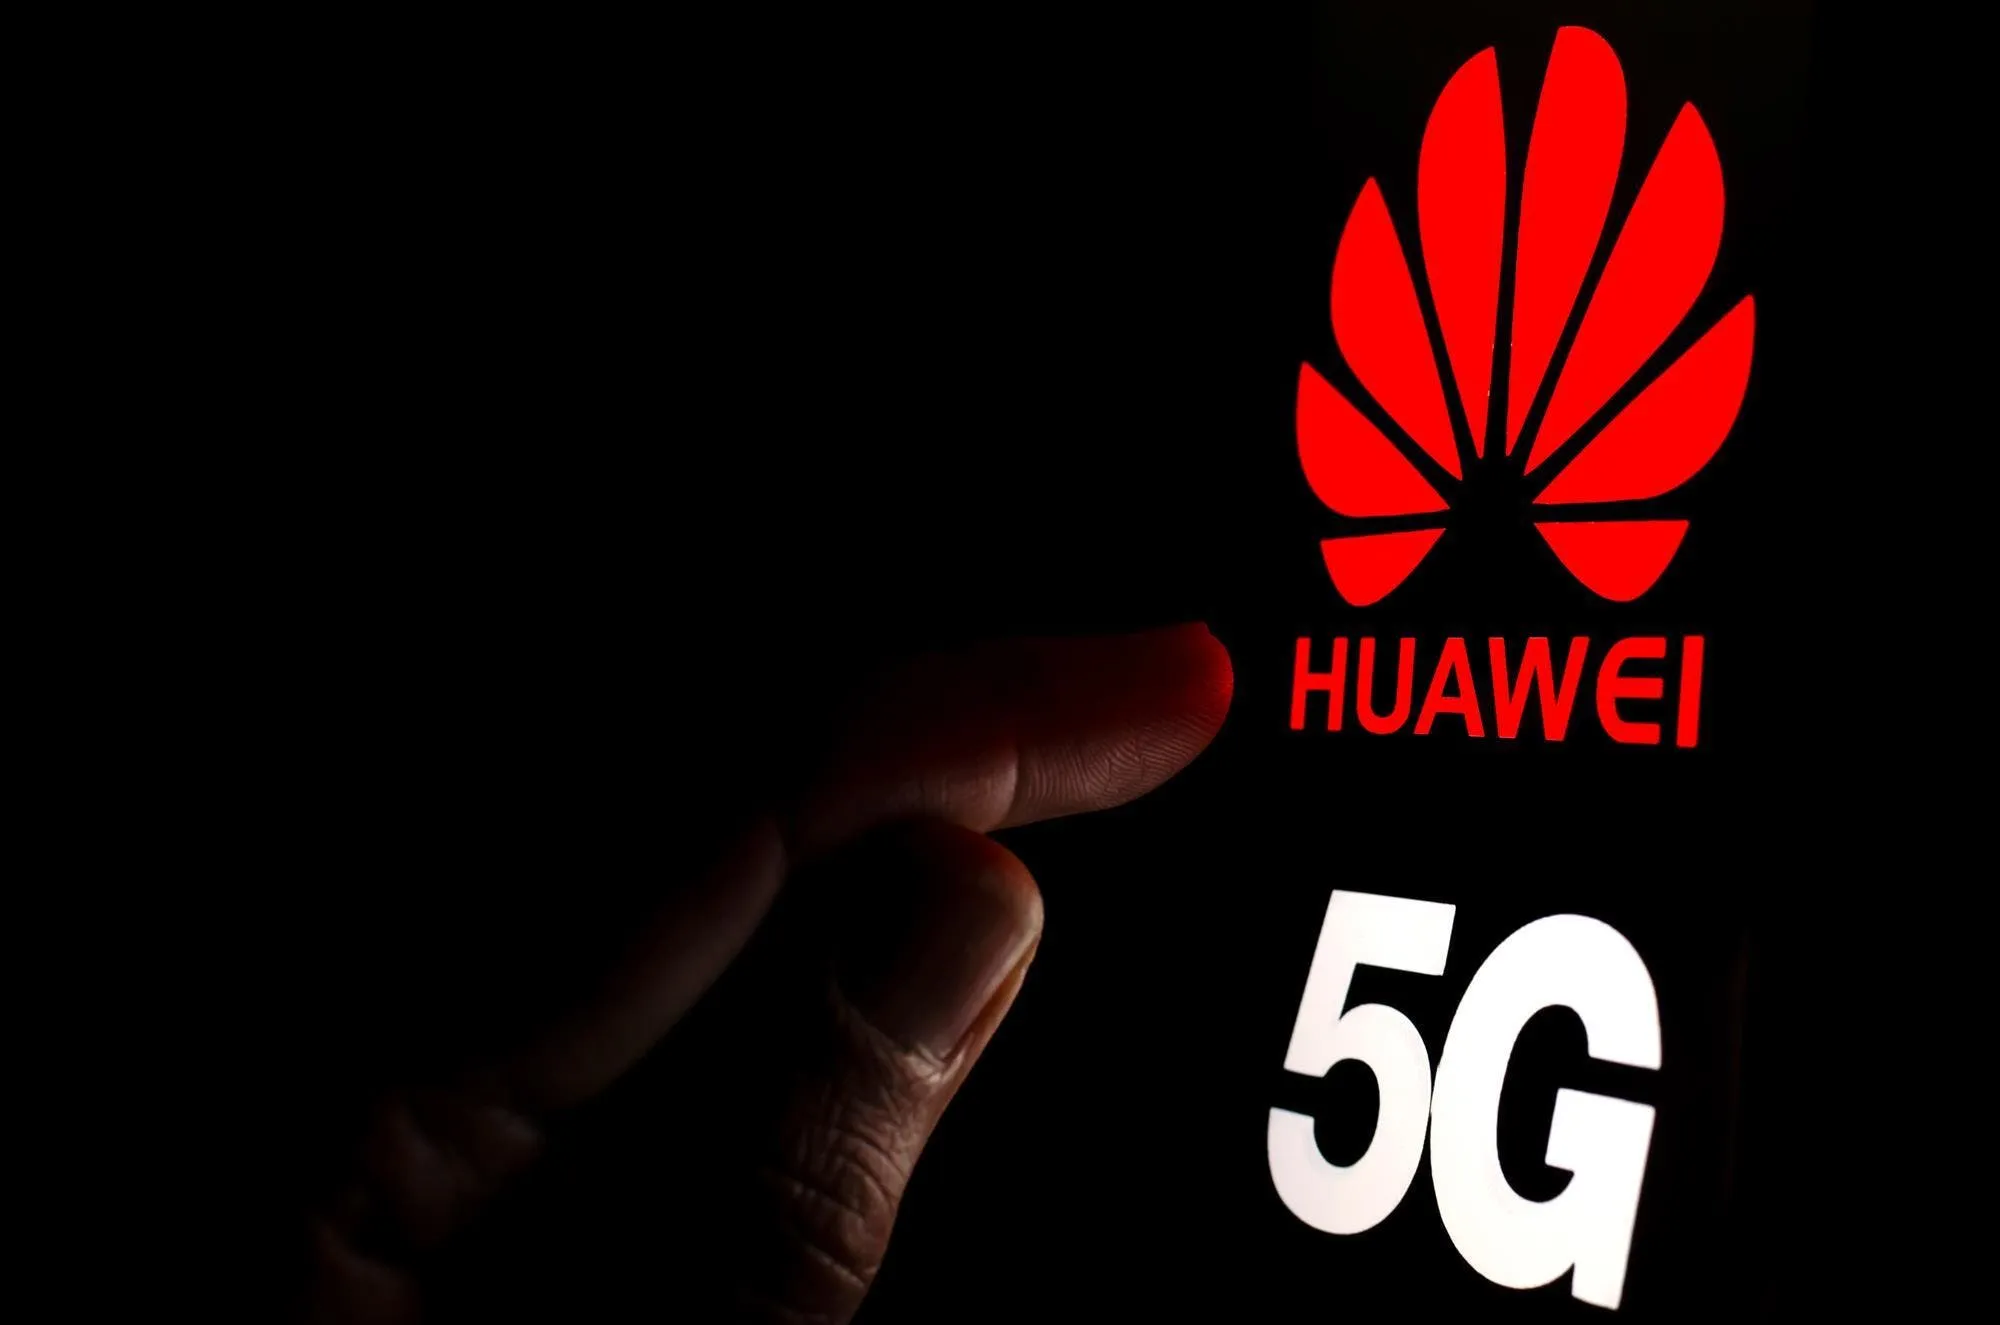 Huawei Helps Create 5G New Calls - Subvert Phone Calls and Video Chats